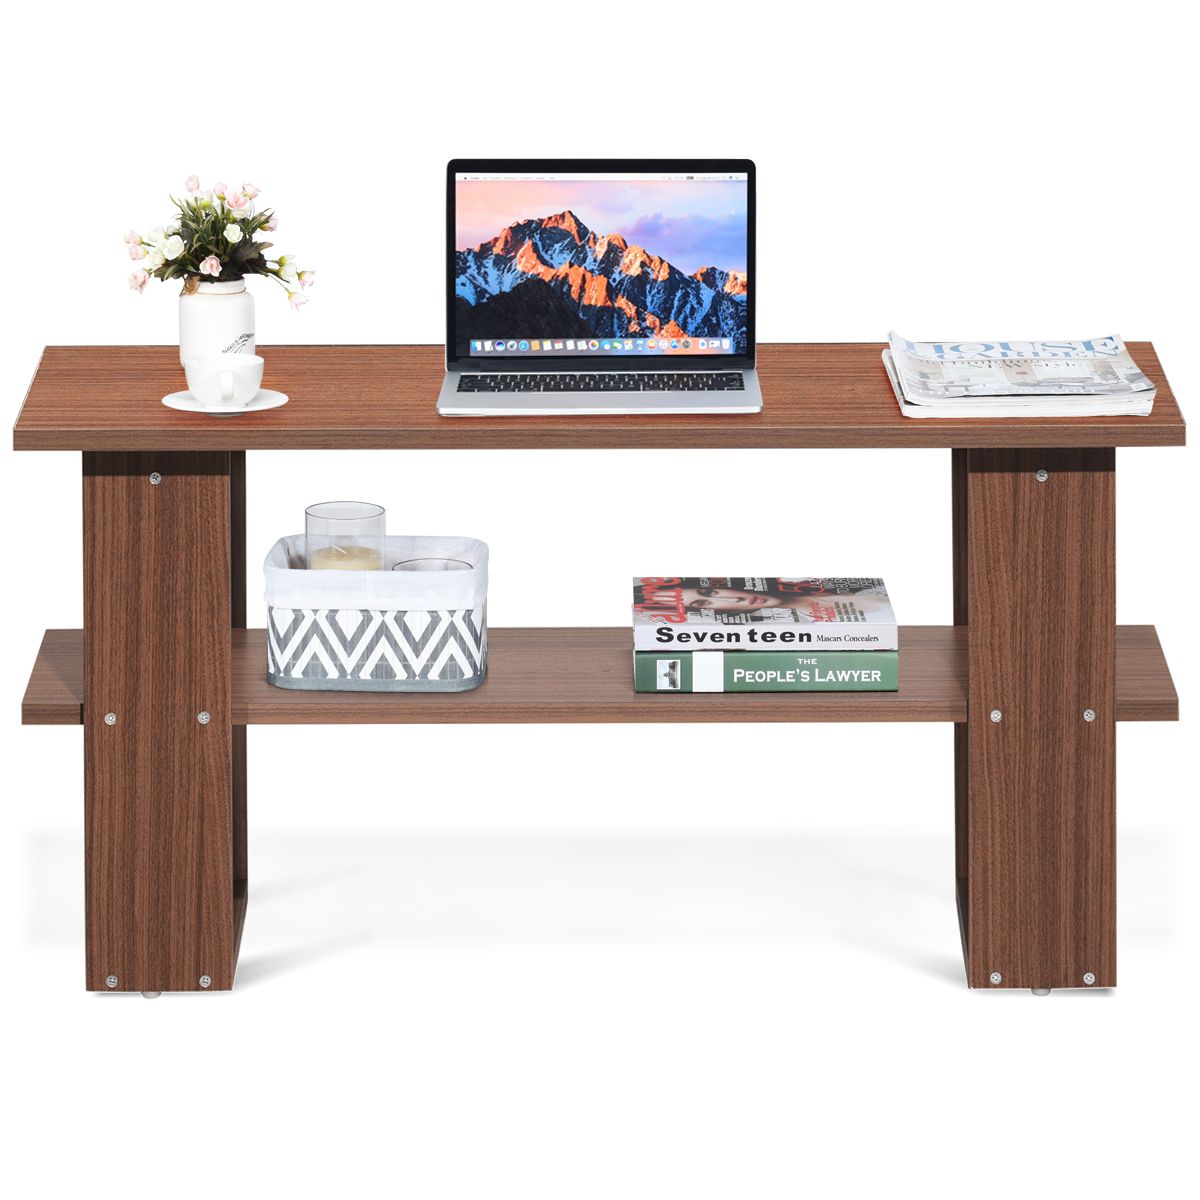 Rustic Coffee Table Wooden Rectangular Coffee Table With For Espresso Wood Storage Console Tables (View 8 of 20)